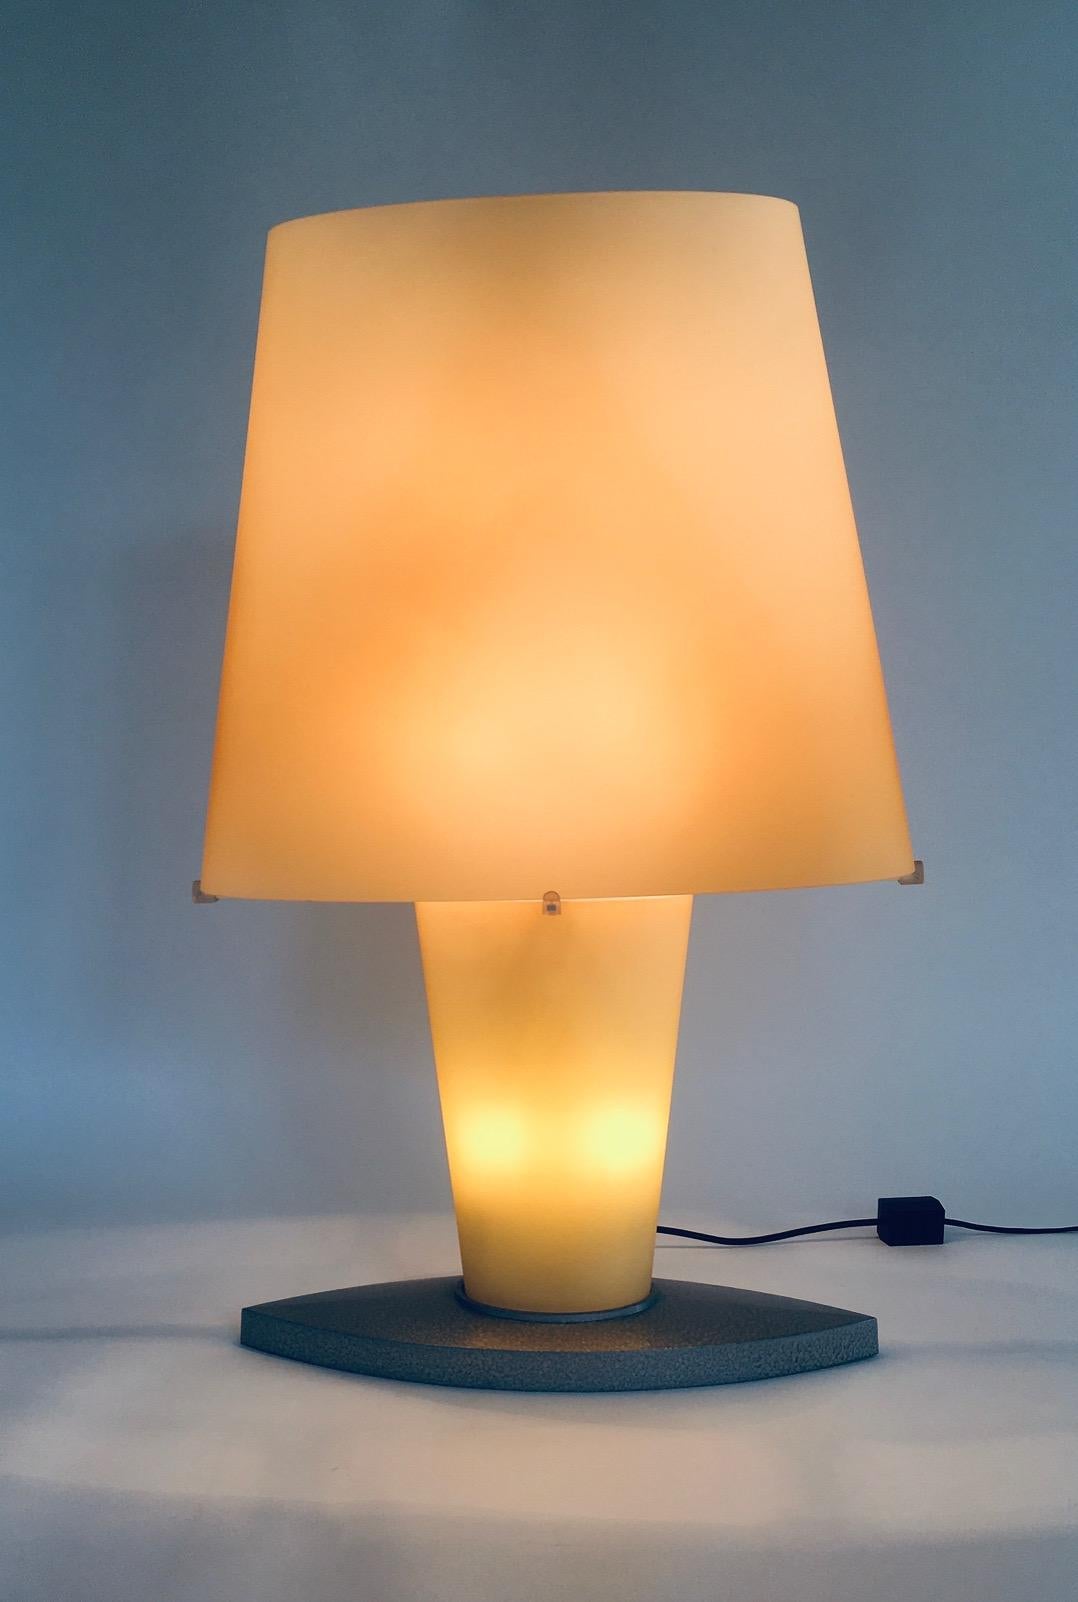 Postmodern Design XL Glass Table Lamp by Daniela Puppa for Fontana Arte. Made in Italy, 1980's/90's period. Model 2892. This is the XL table lamp model. Frost glass in a yellow color with a metal base. The lamp can be lit up in 2 fases. The bottom